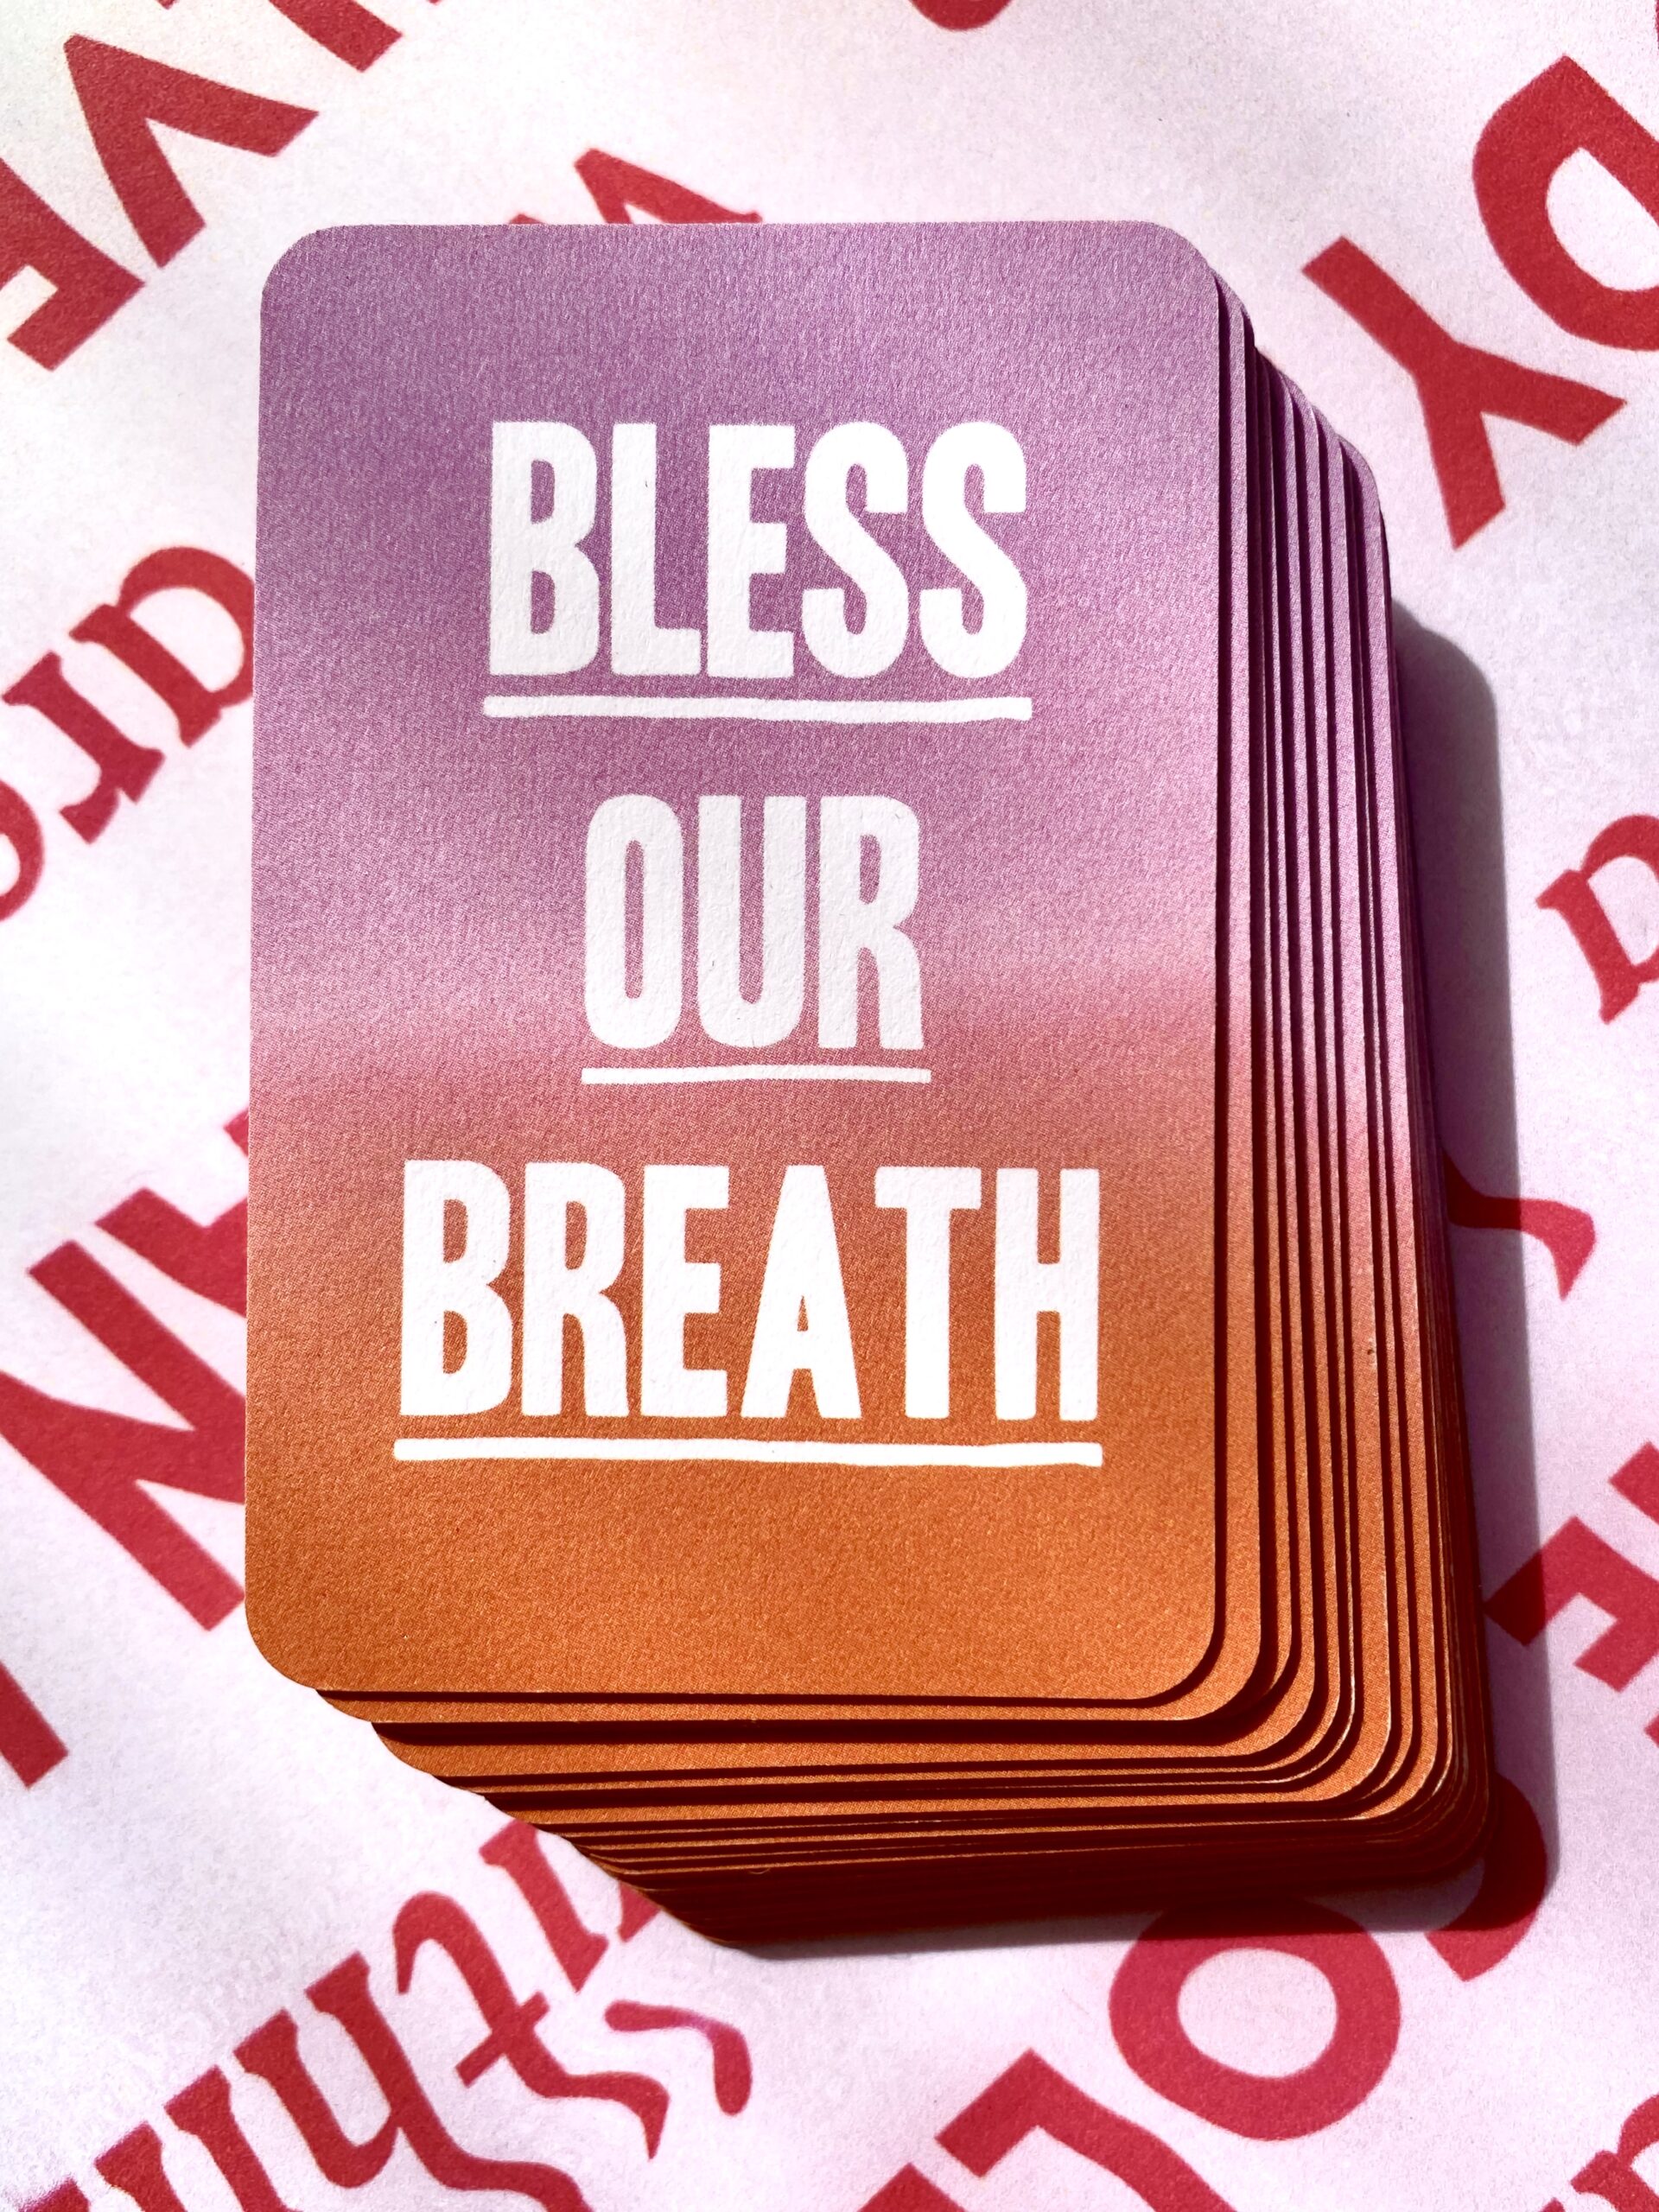 bless our breath